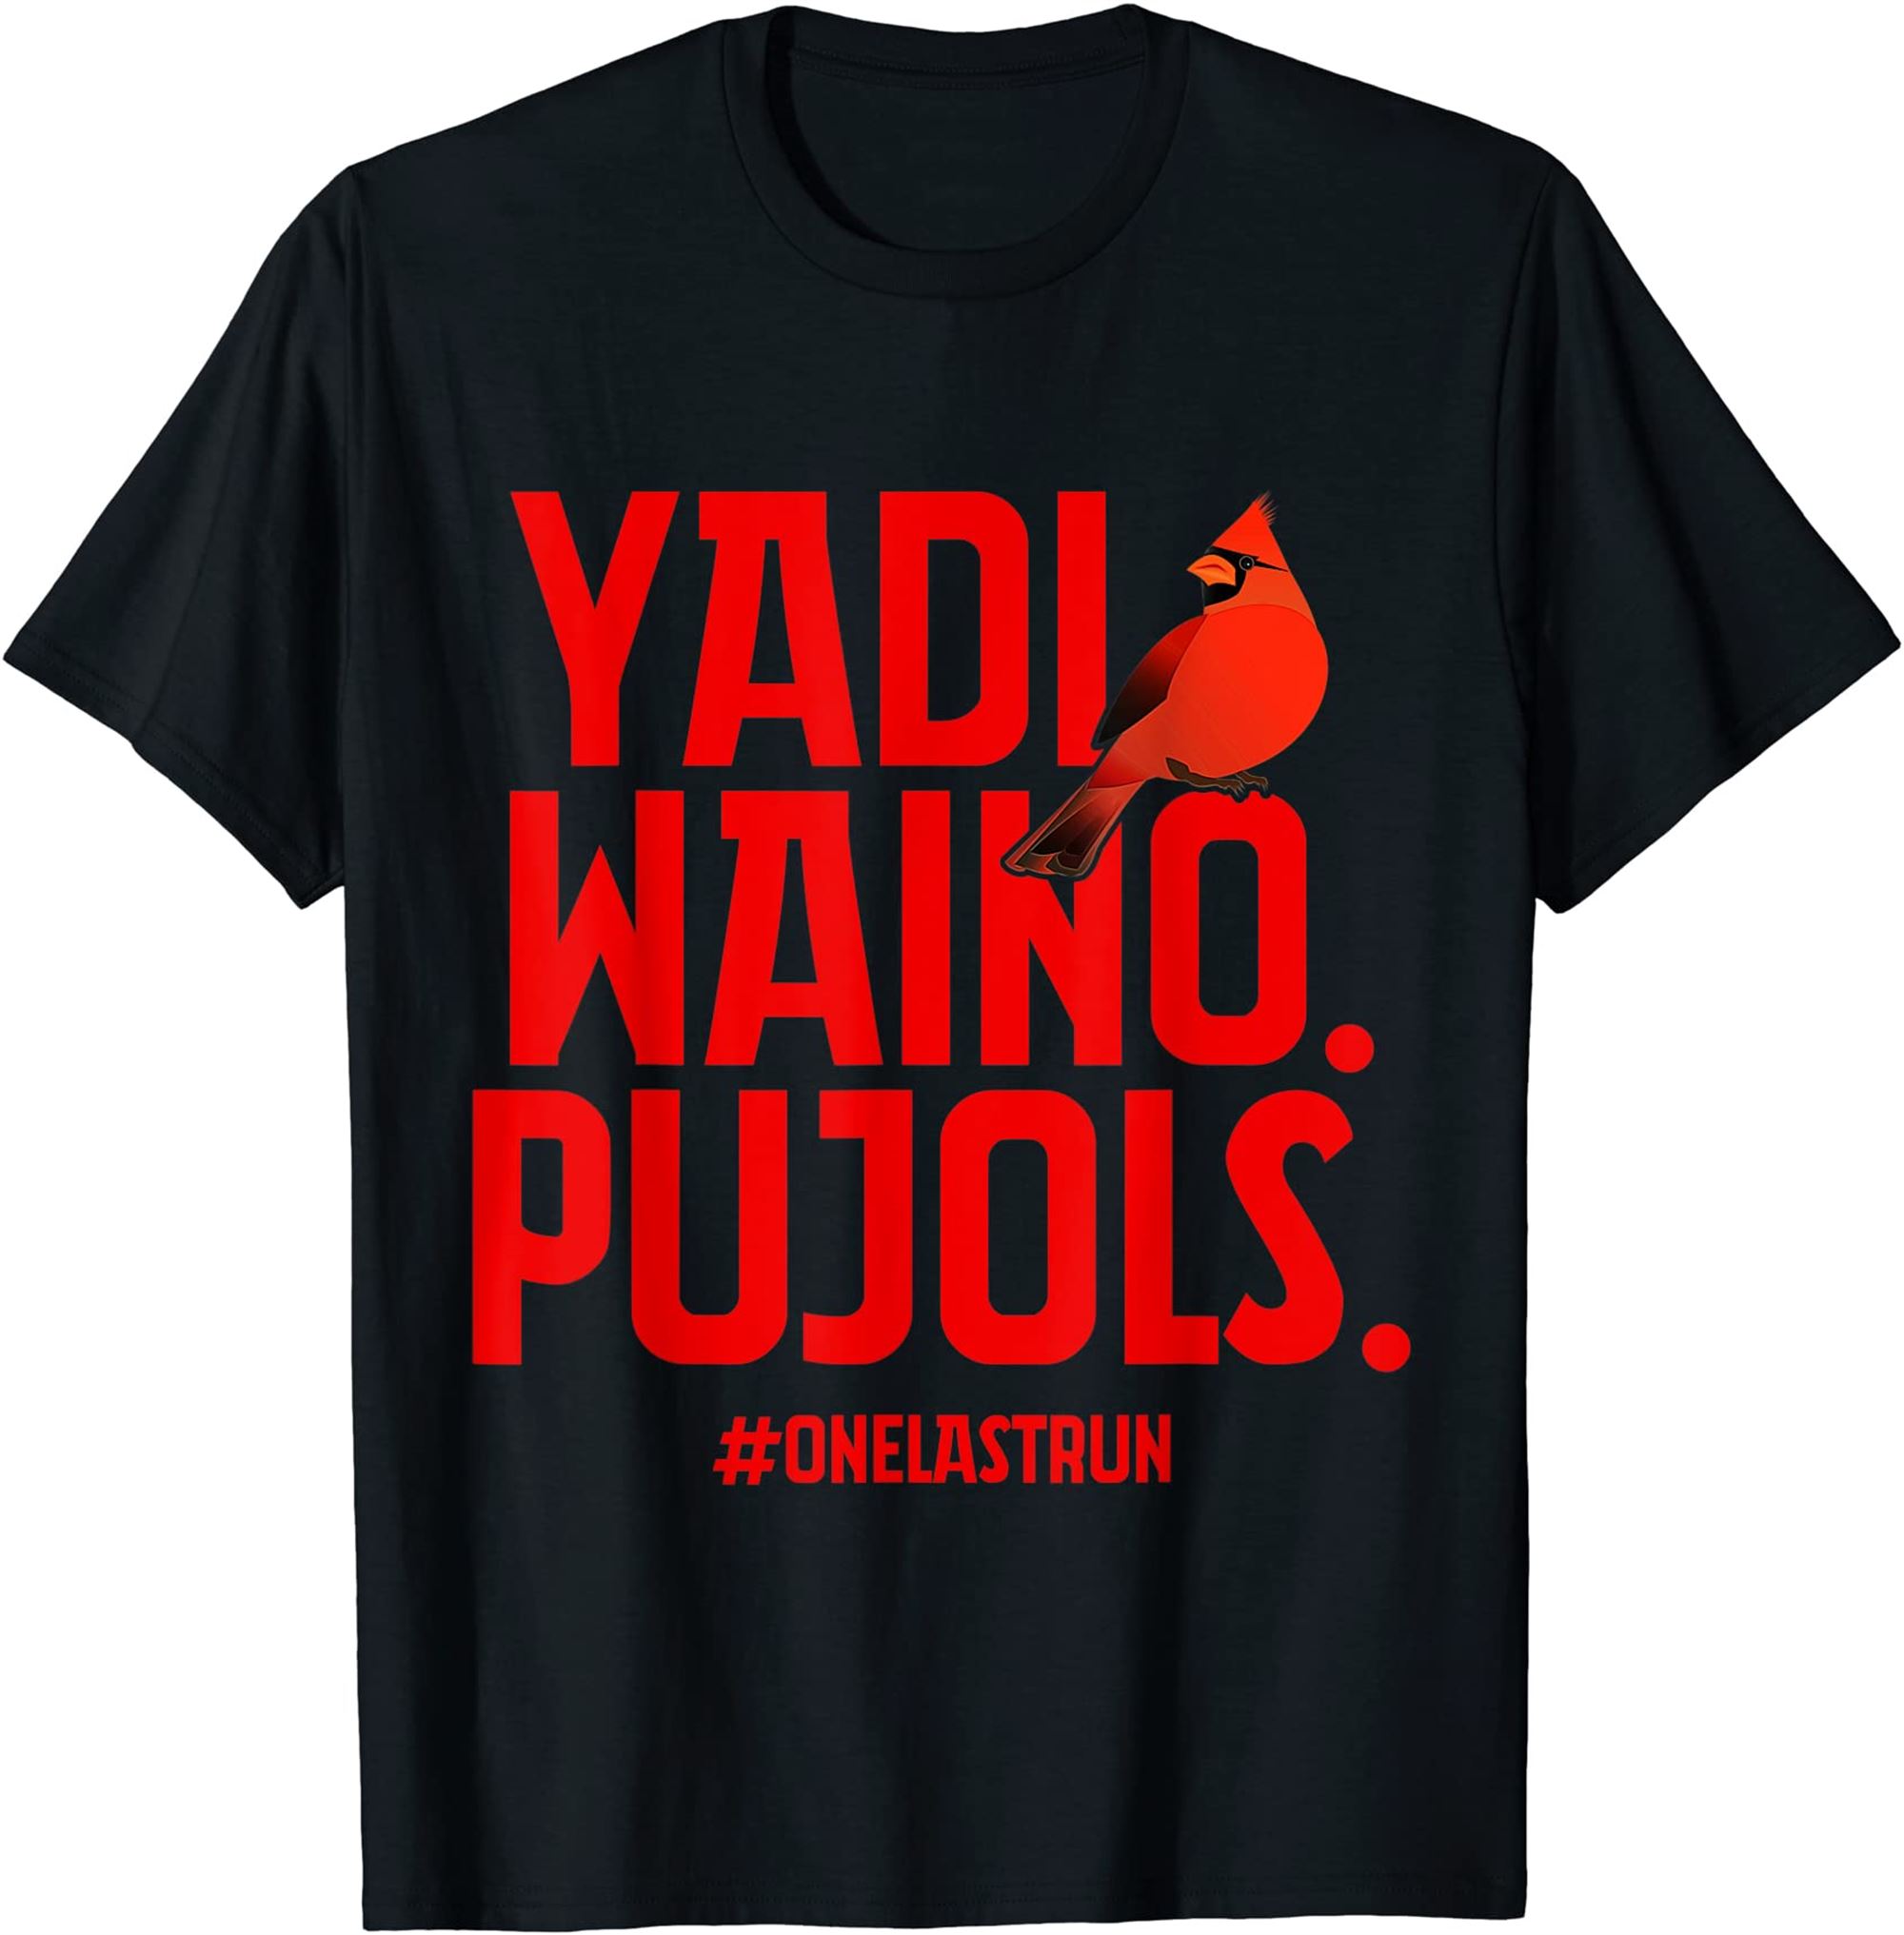 Yadi Waino Pujols Red Letter T-shirt Plus Size Up To 5xl